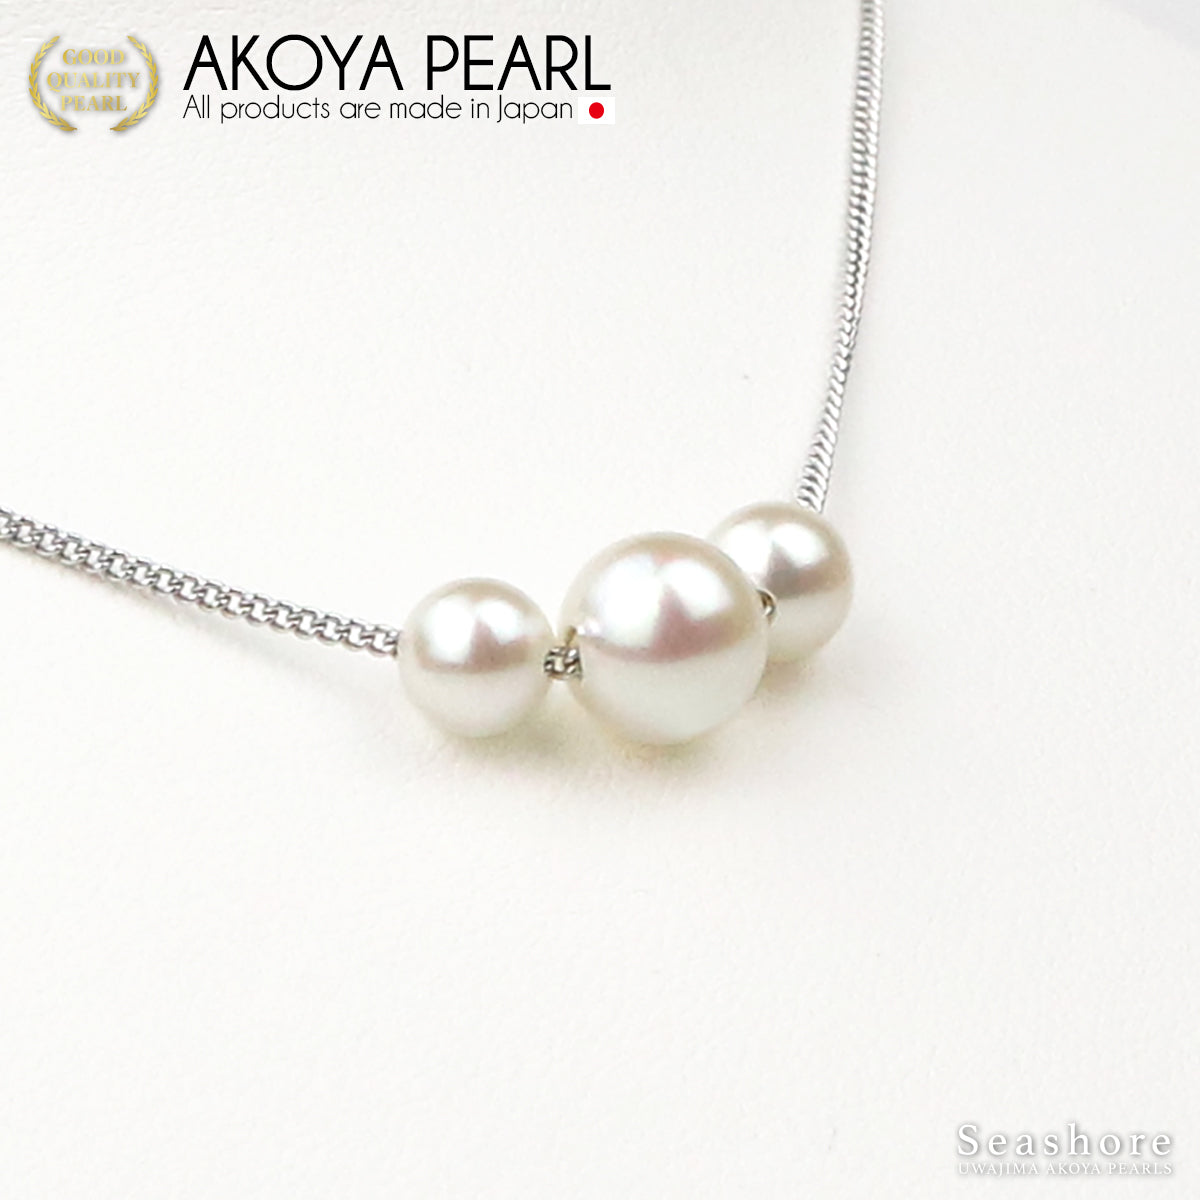 Akoya pearl 3 pearl through necklace [6.0-8.5mm] Brass rhodium pearl necklace 2 types to choose from